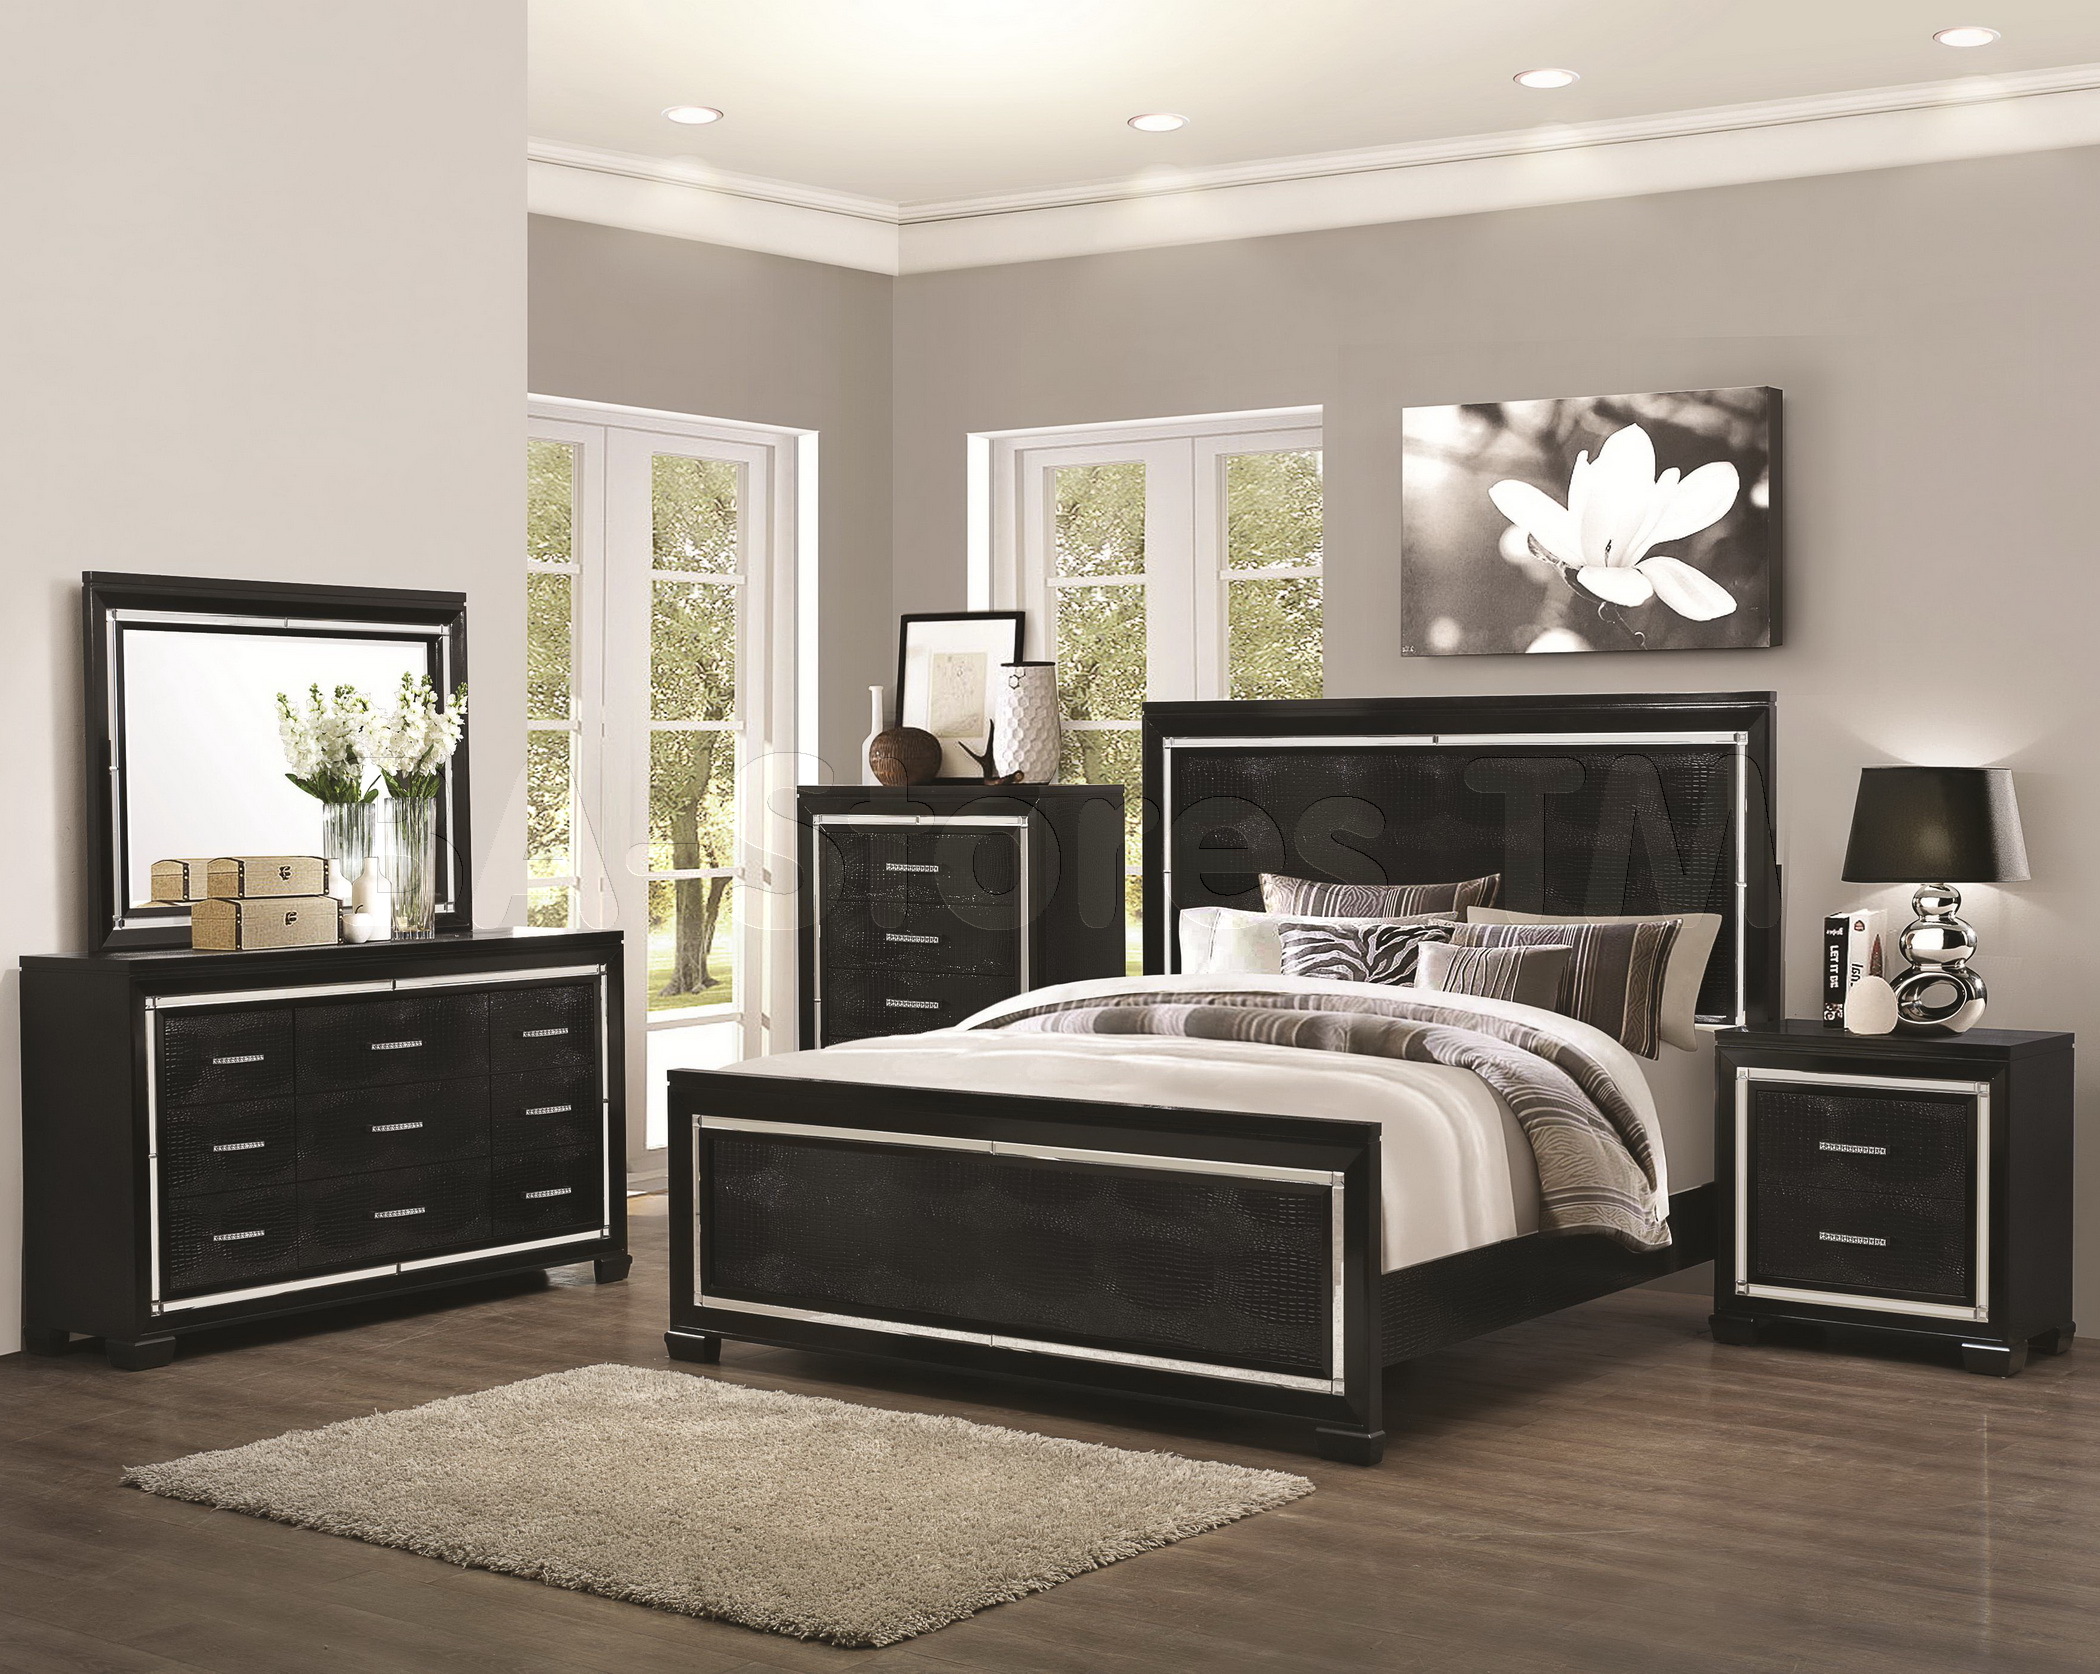 black and mirrored bedroom furniture